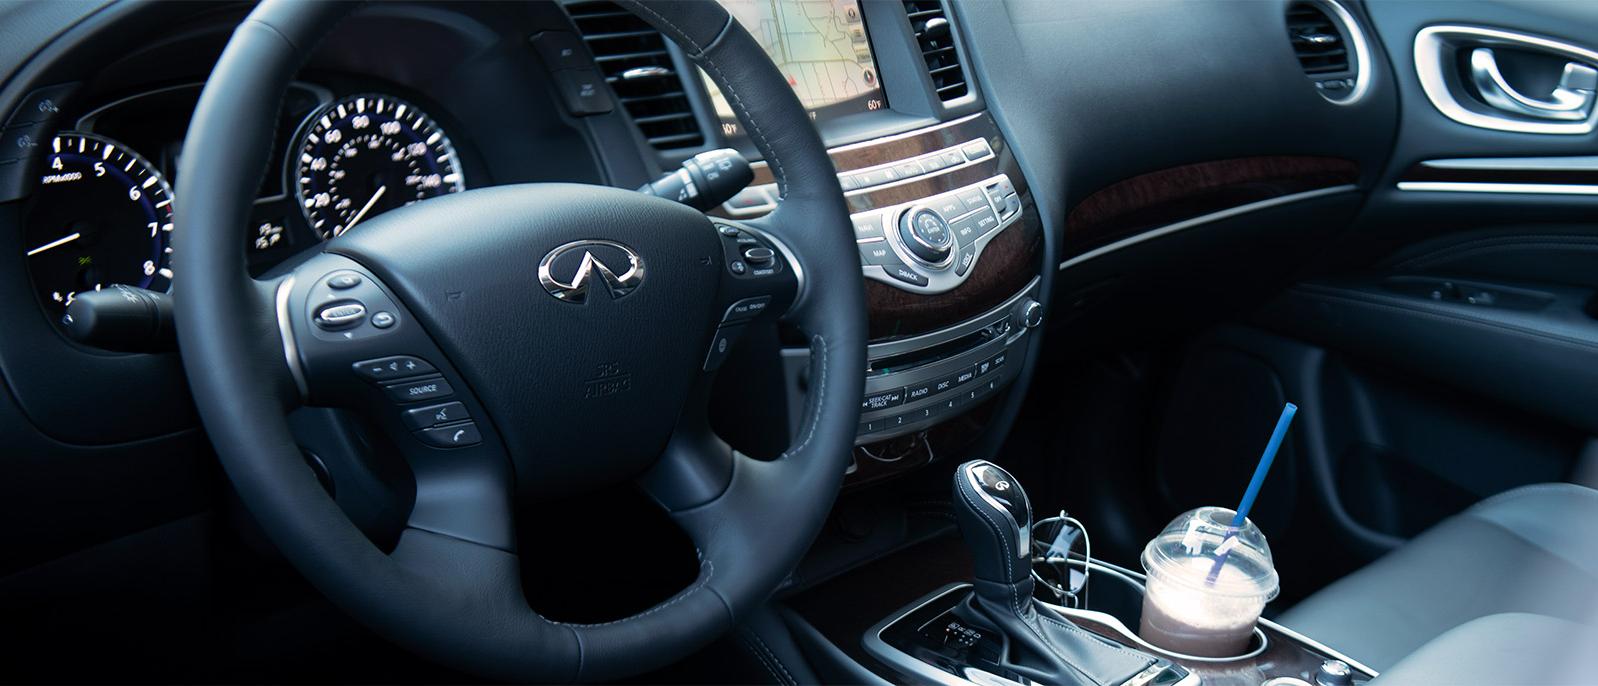 Interior view of an INFINITI QX60 from the driver's point of view.